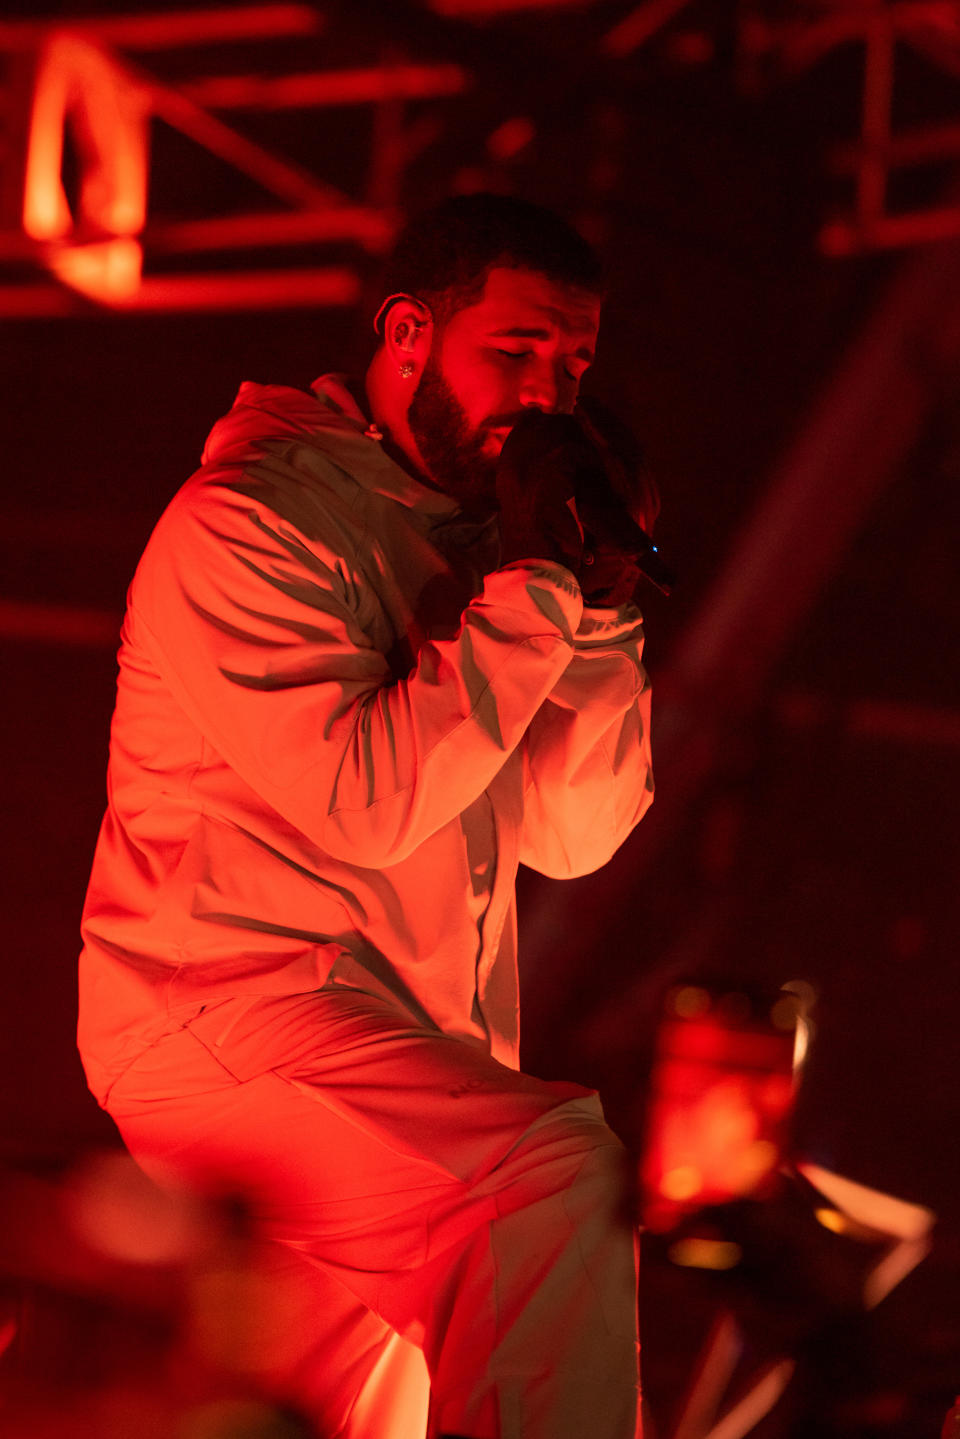 Drake performs at ‘HOMECOMING WEEKEND’ Hosted By The h.wood Group & REVOLVE, Presented By PLACES.CO and Flow.com, Produced By Uncommon Entertainment on Feb. 12, 2022 in Los Angeles. - Credit: Vivien Killilea/Getty Images  for Homecoming Weekend